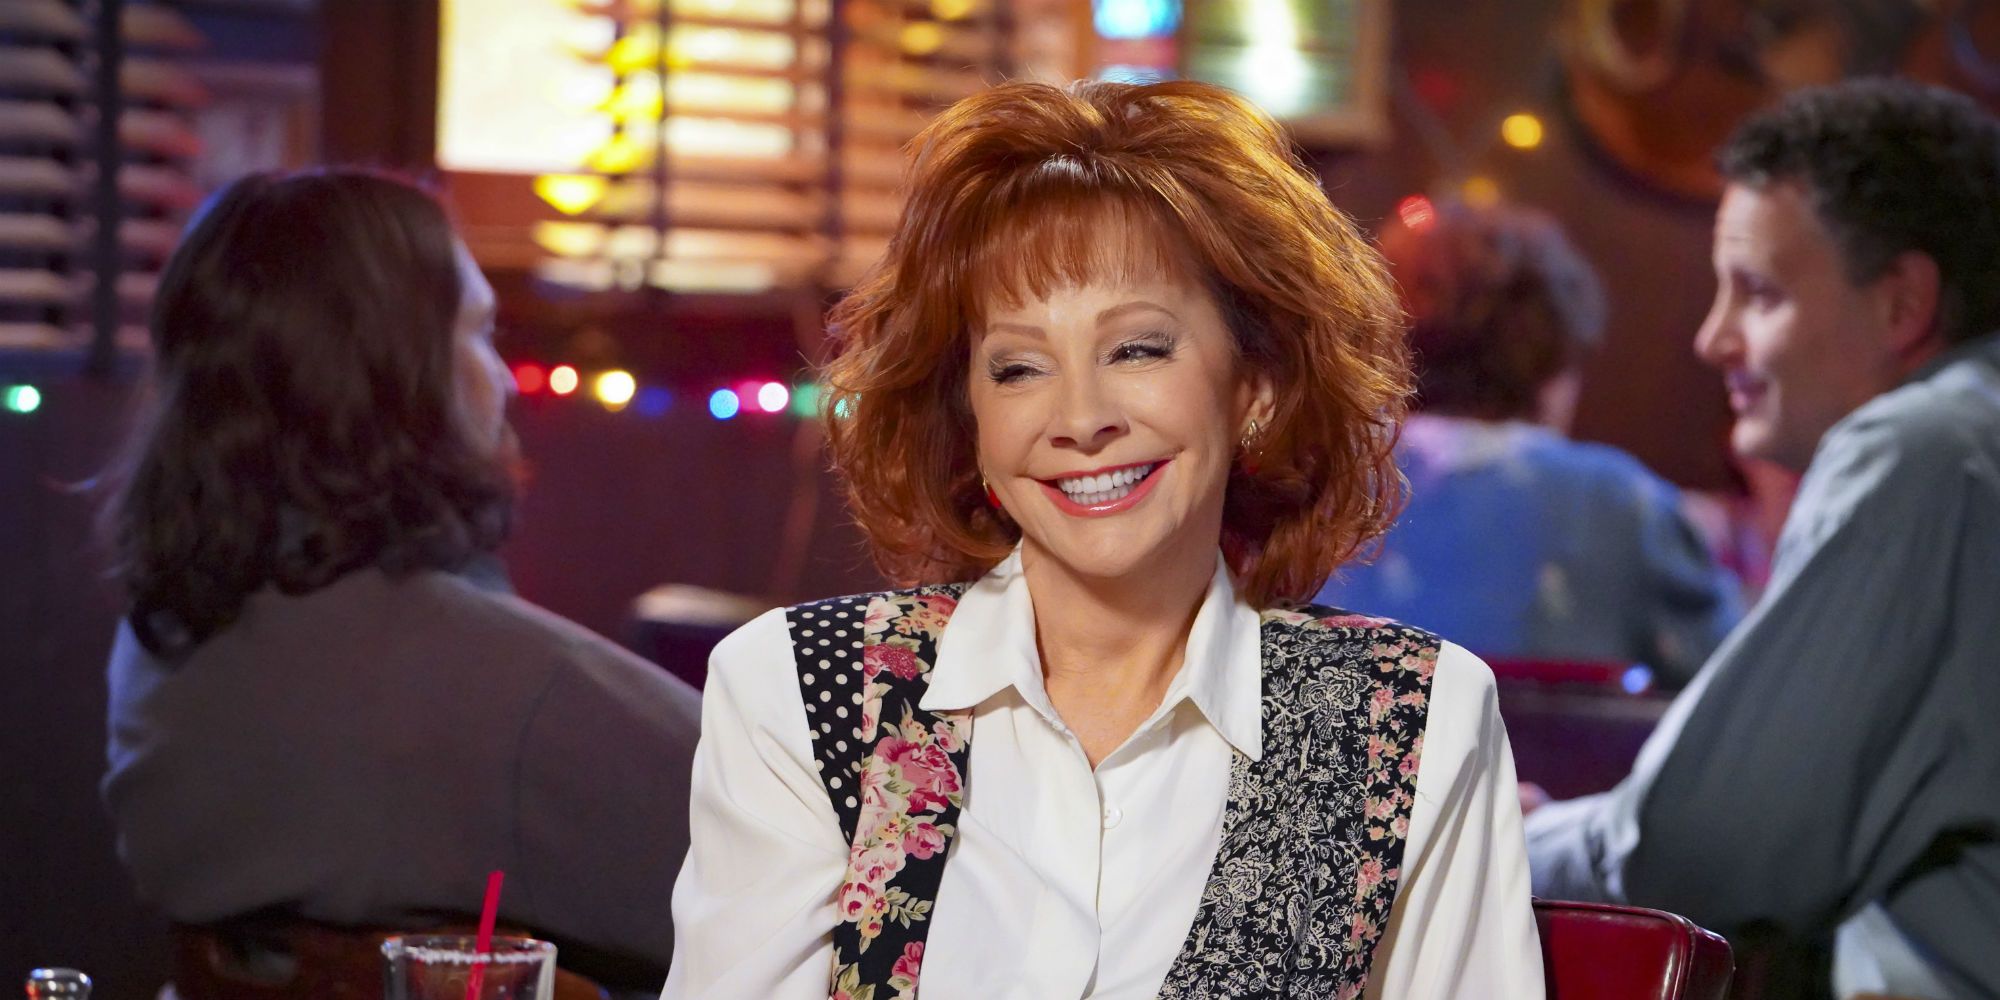 Reba McEntire smiling in a bar in Young Sheldon